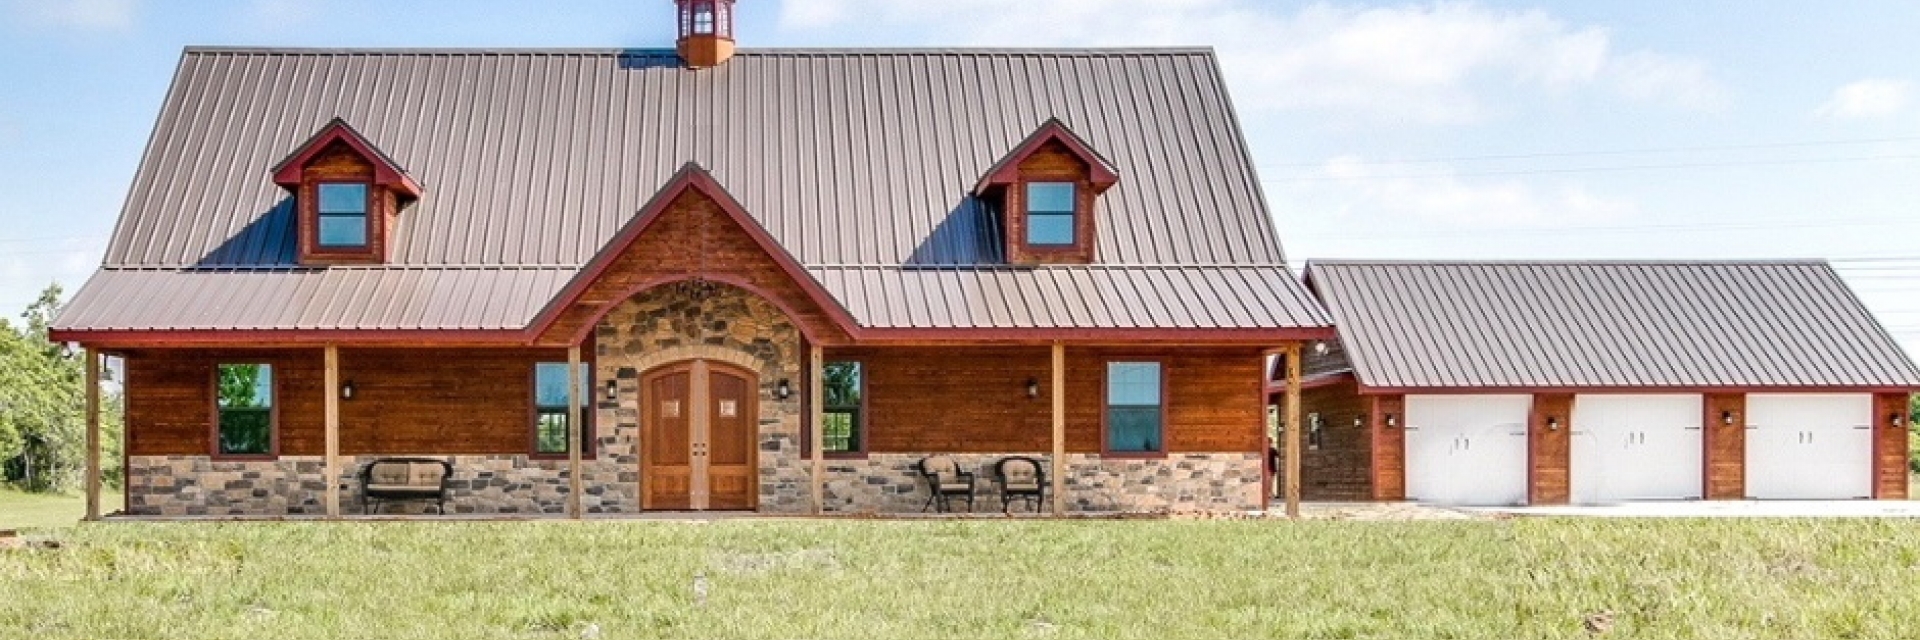 INSPIRED BY THE BARNS OF THE PAST, DESIGNED FOR GENERATIONS TO ENJOY.